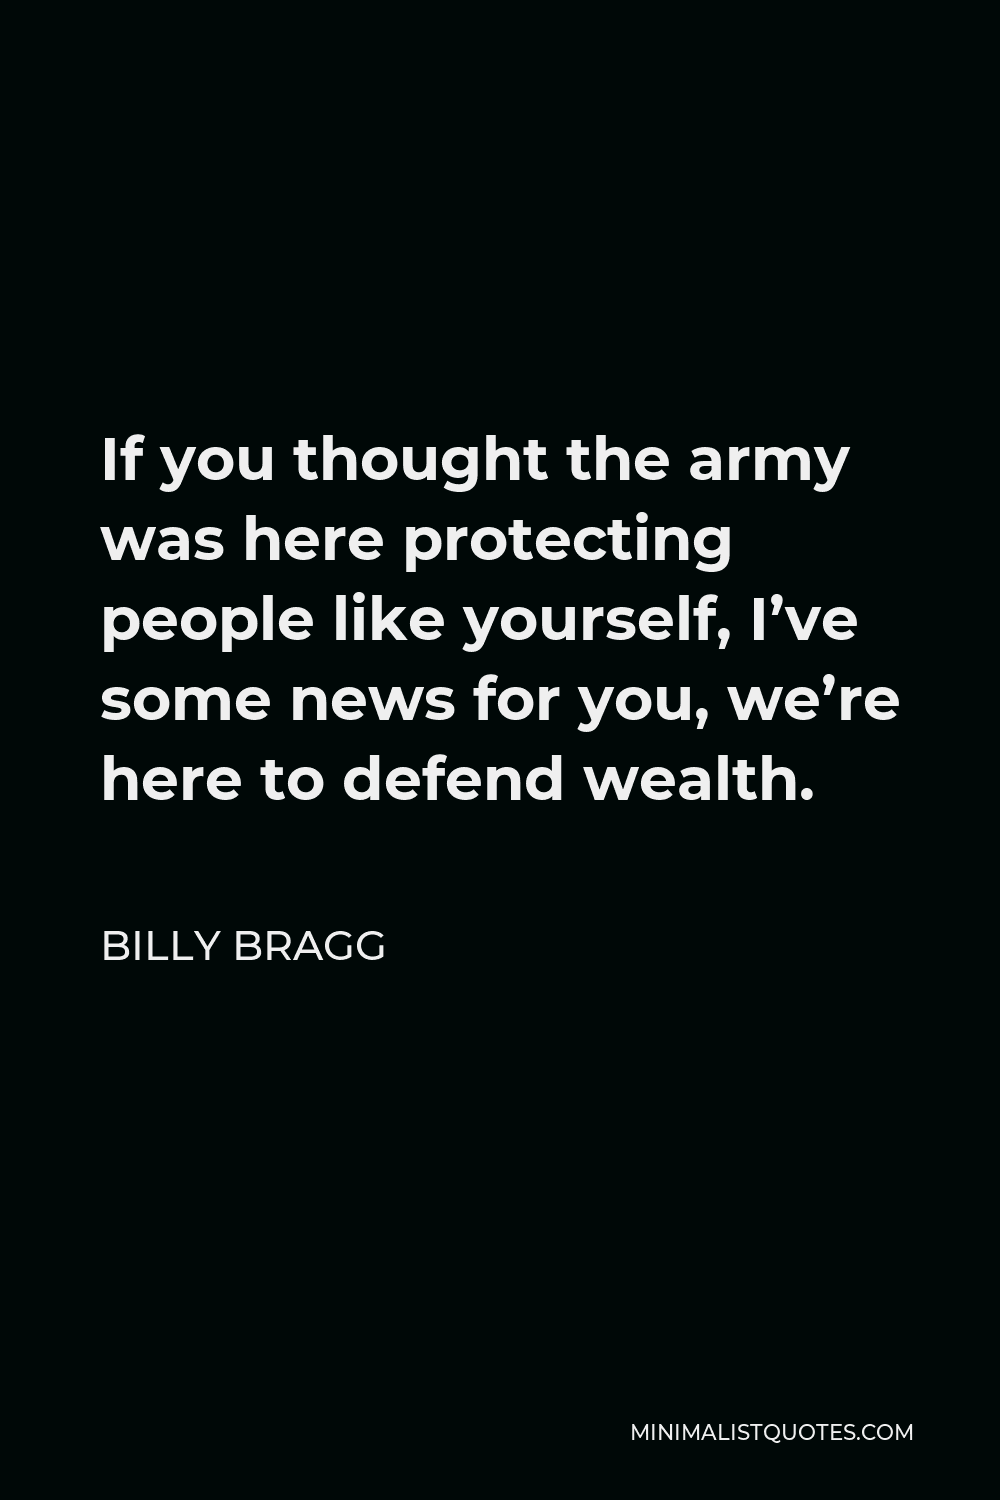 Billy Bragg Quote - If you thought the army was here protecting people like yourself, I’ve some news for you, we’re here to defend wealth.